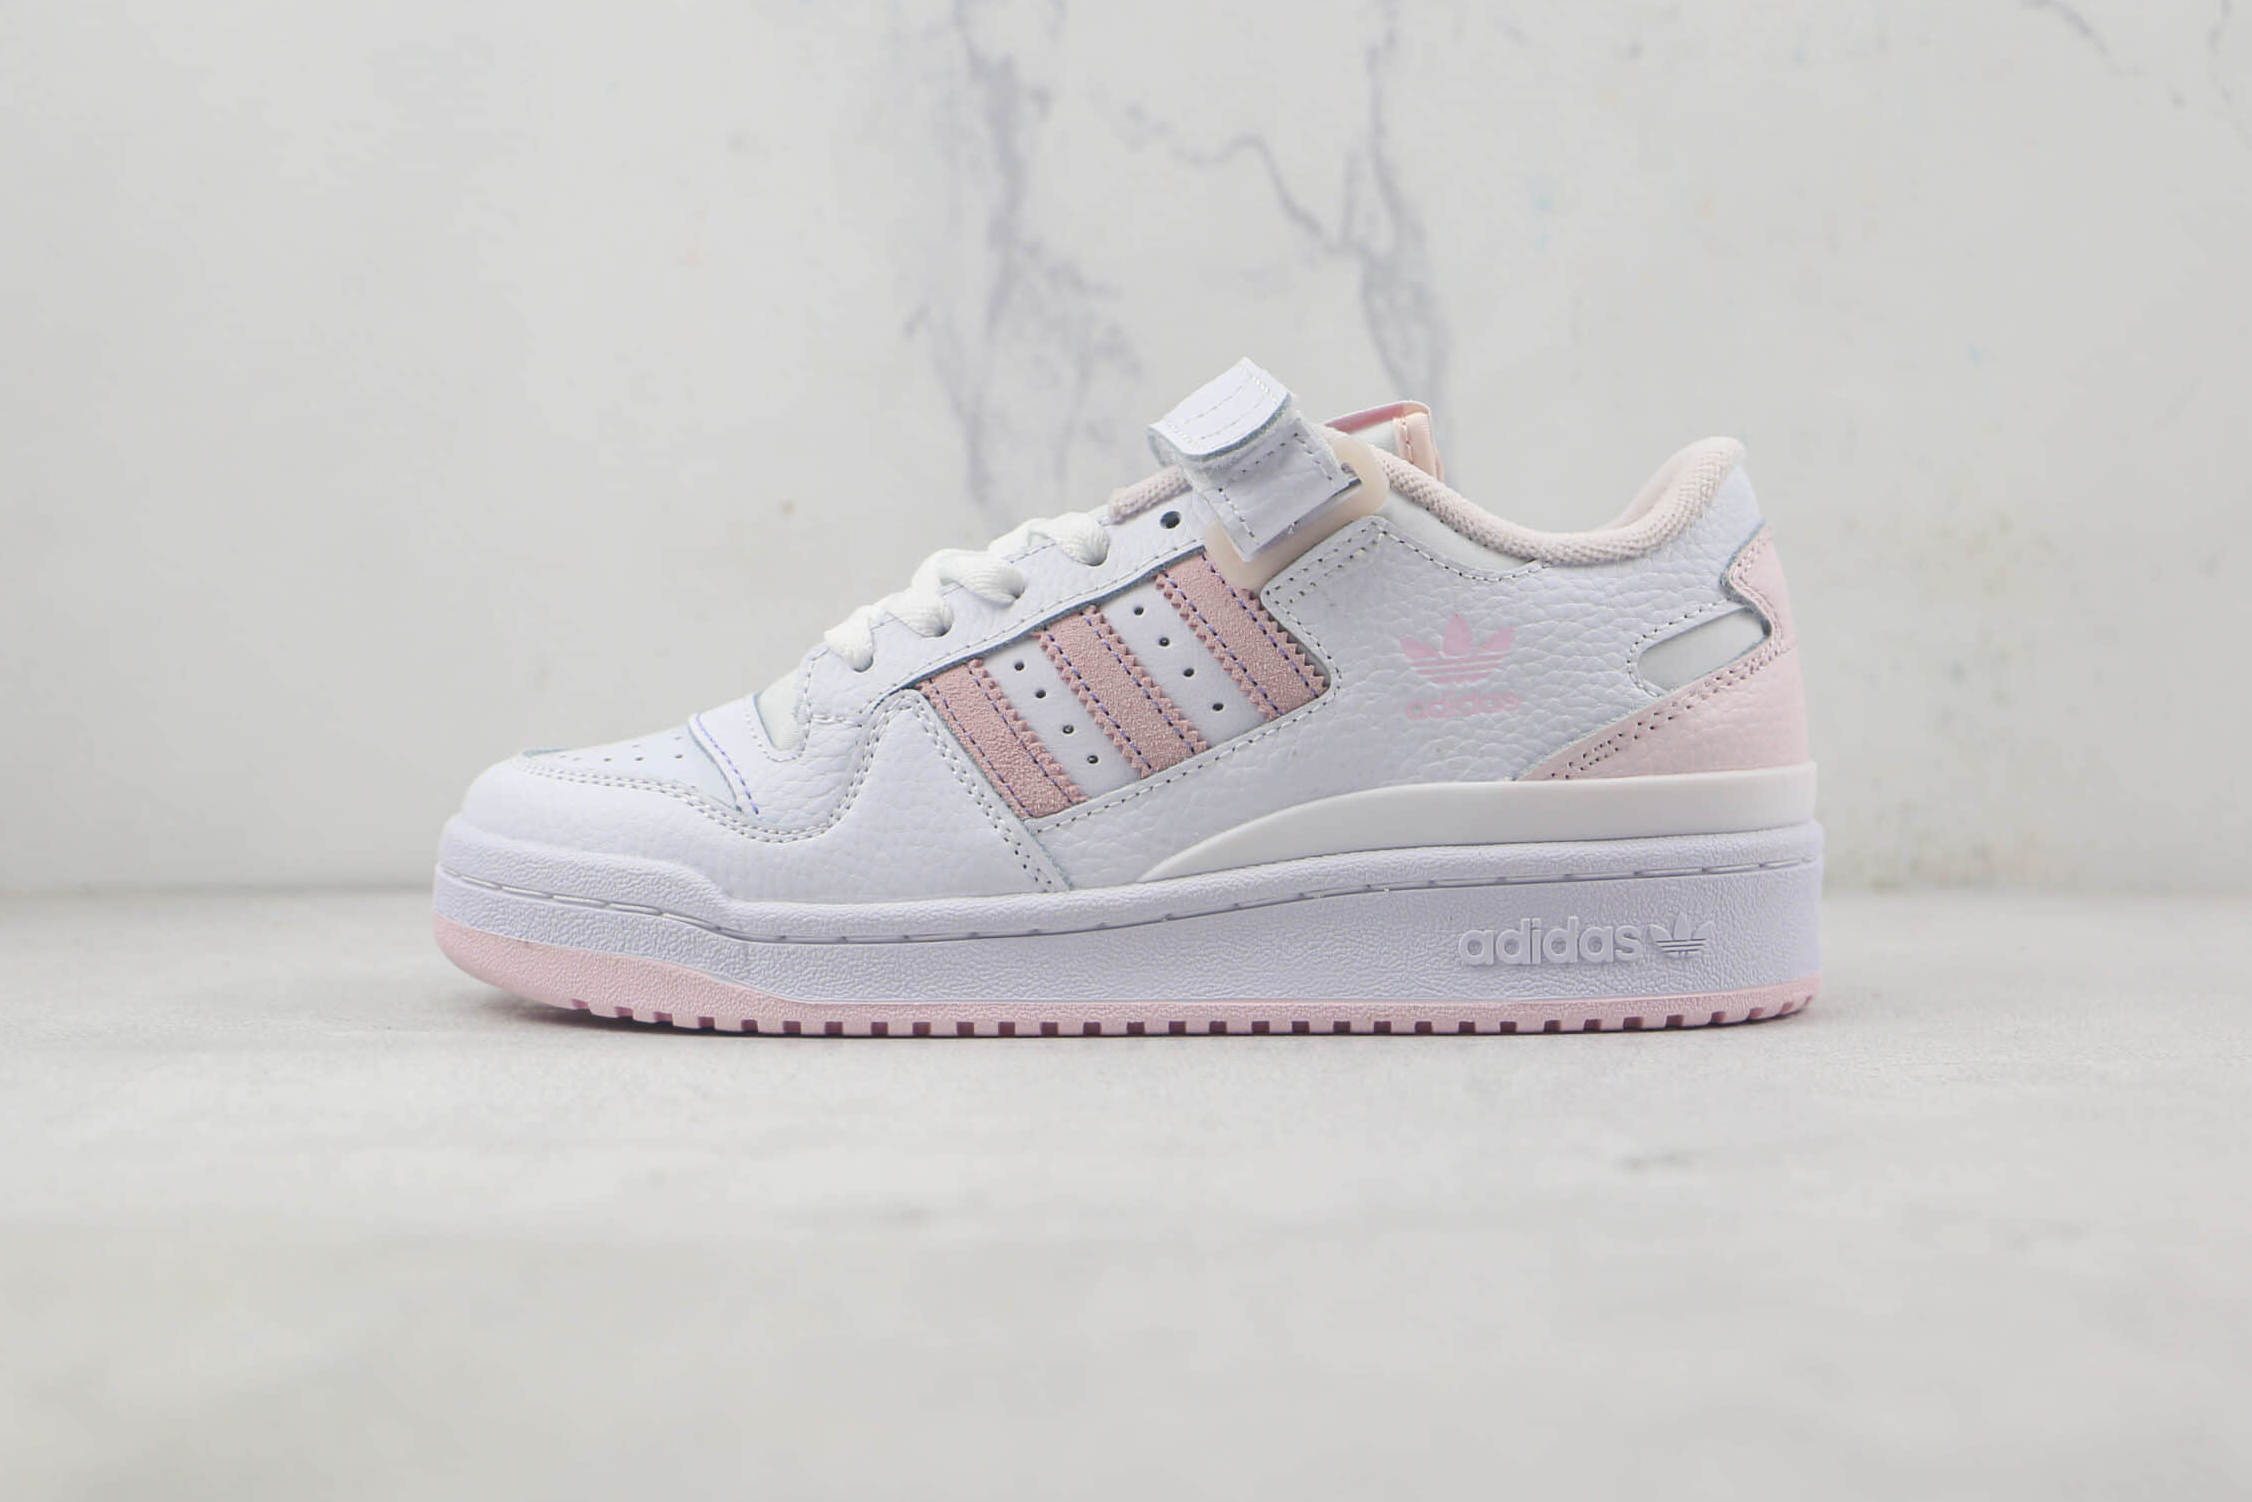 Adidas Forum Low 'White Almost Pink' GY5832 - Classic Sneakers with a Subtle Pink Twist